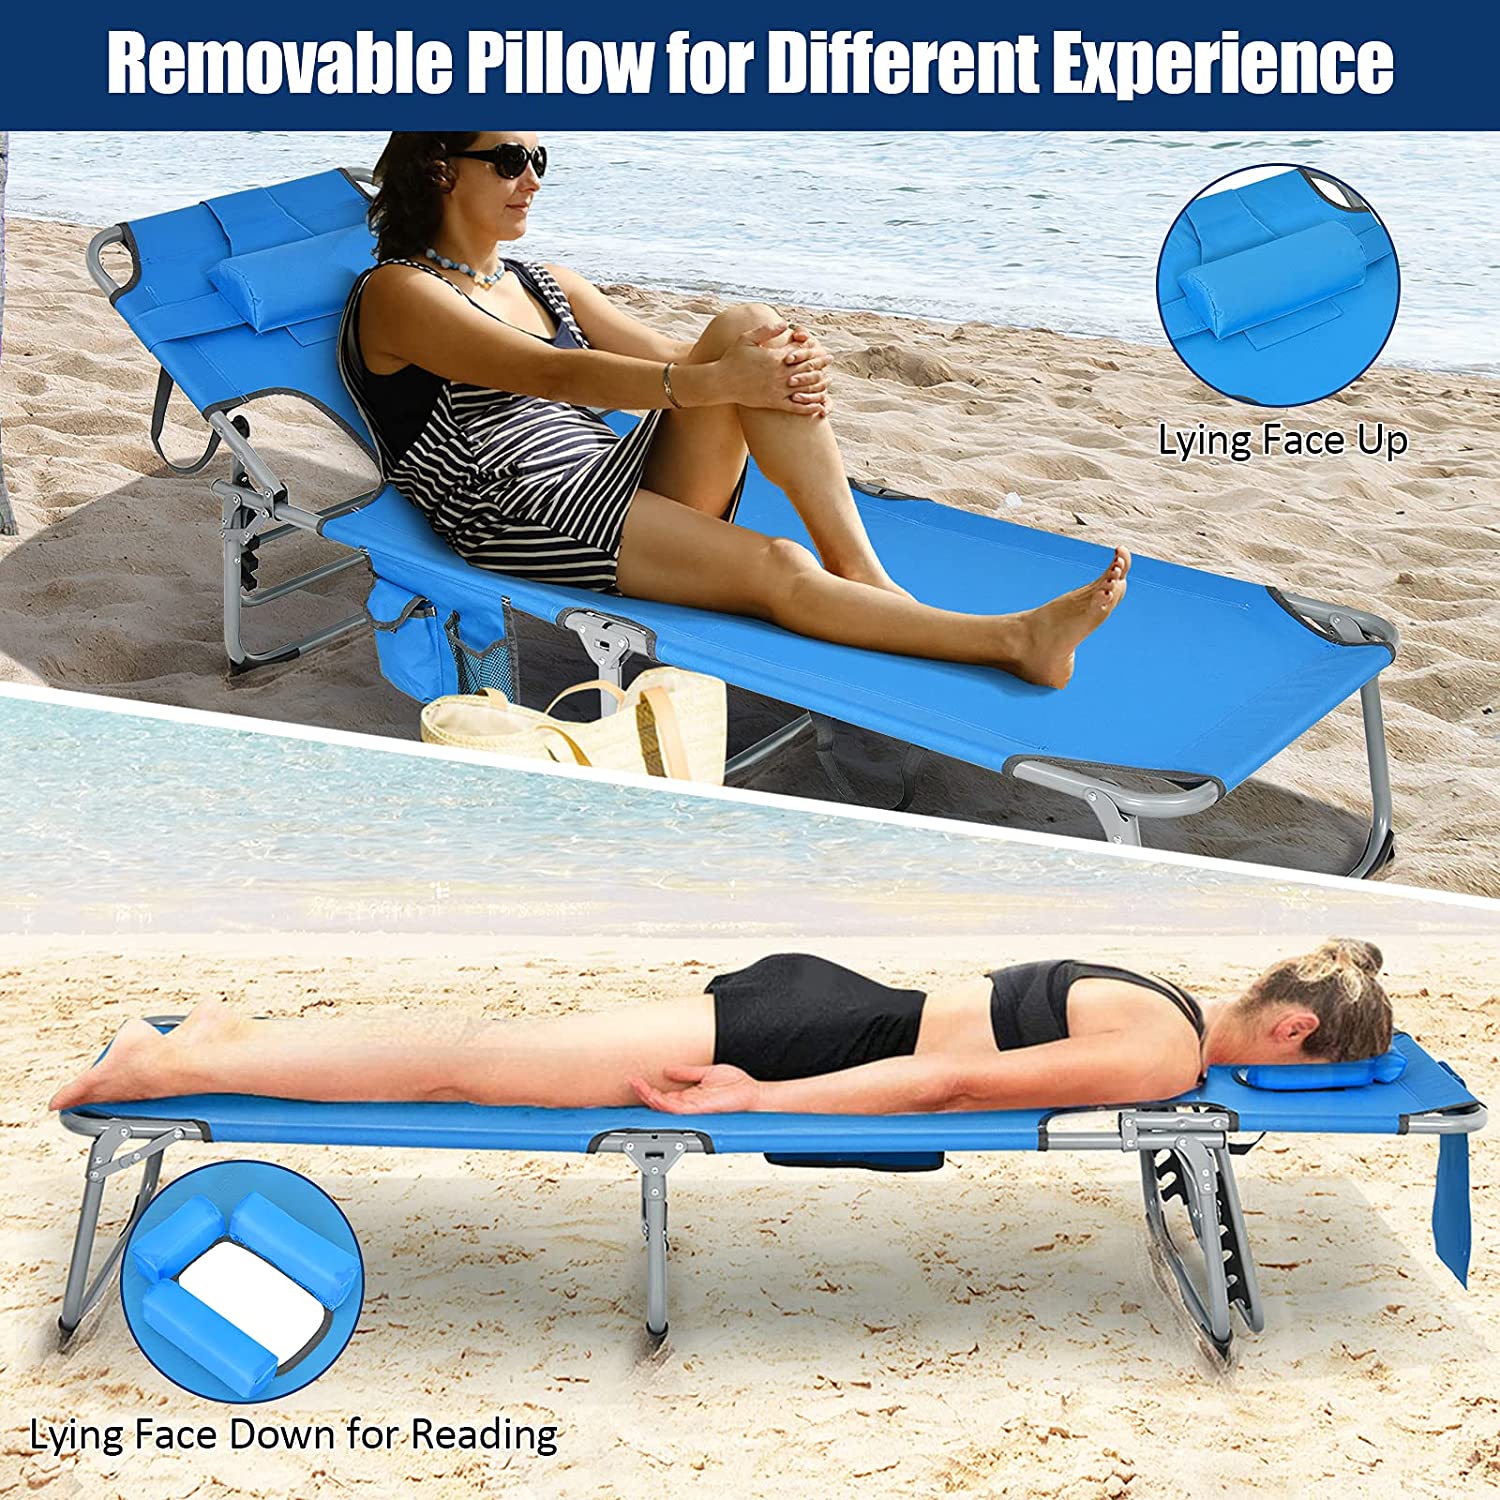 Beach Chaise Lounge Chair, Patio Folding Recliner with Face Cavity Hole, Detachable Pillow, Arm Slots, Storage Pouch, Portable Tanning Chair for Poolside Adjustable Sunbathing Chair(1,Blue) - image 2 of 9